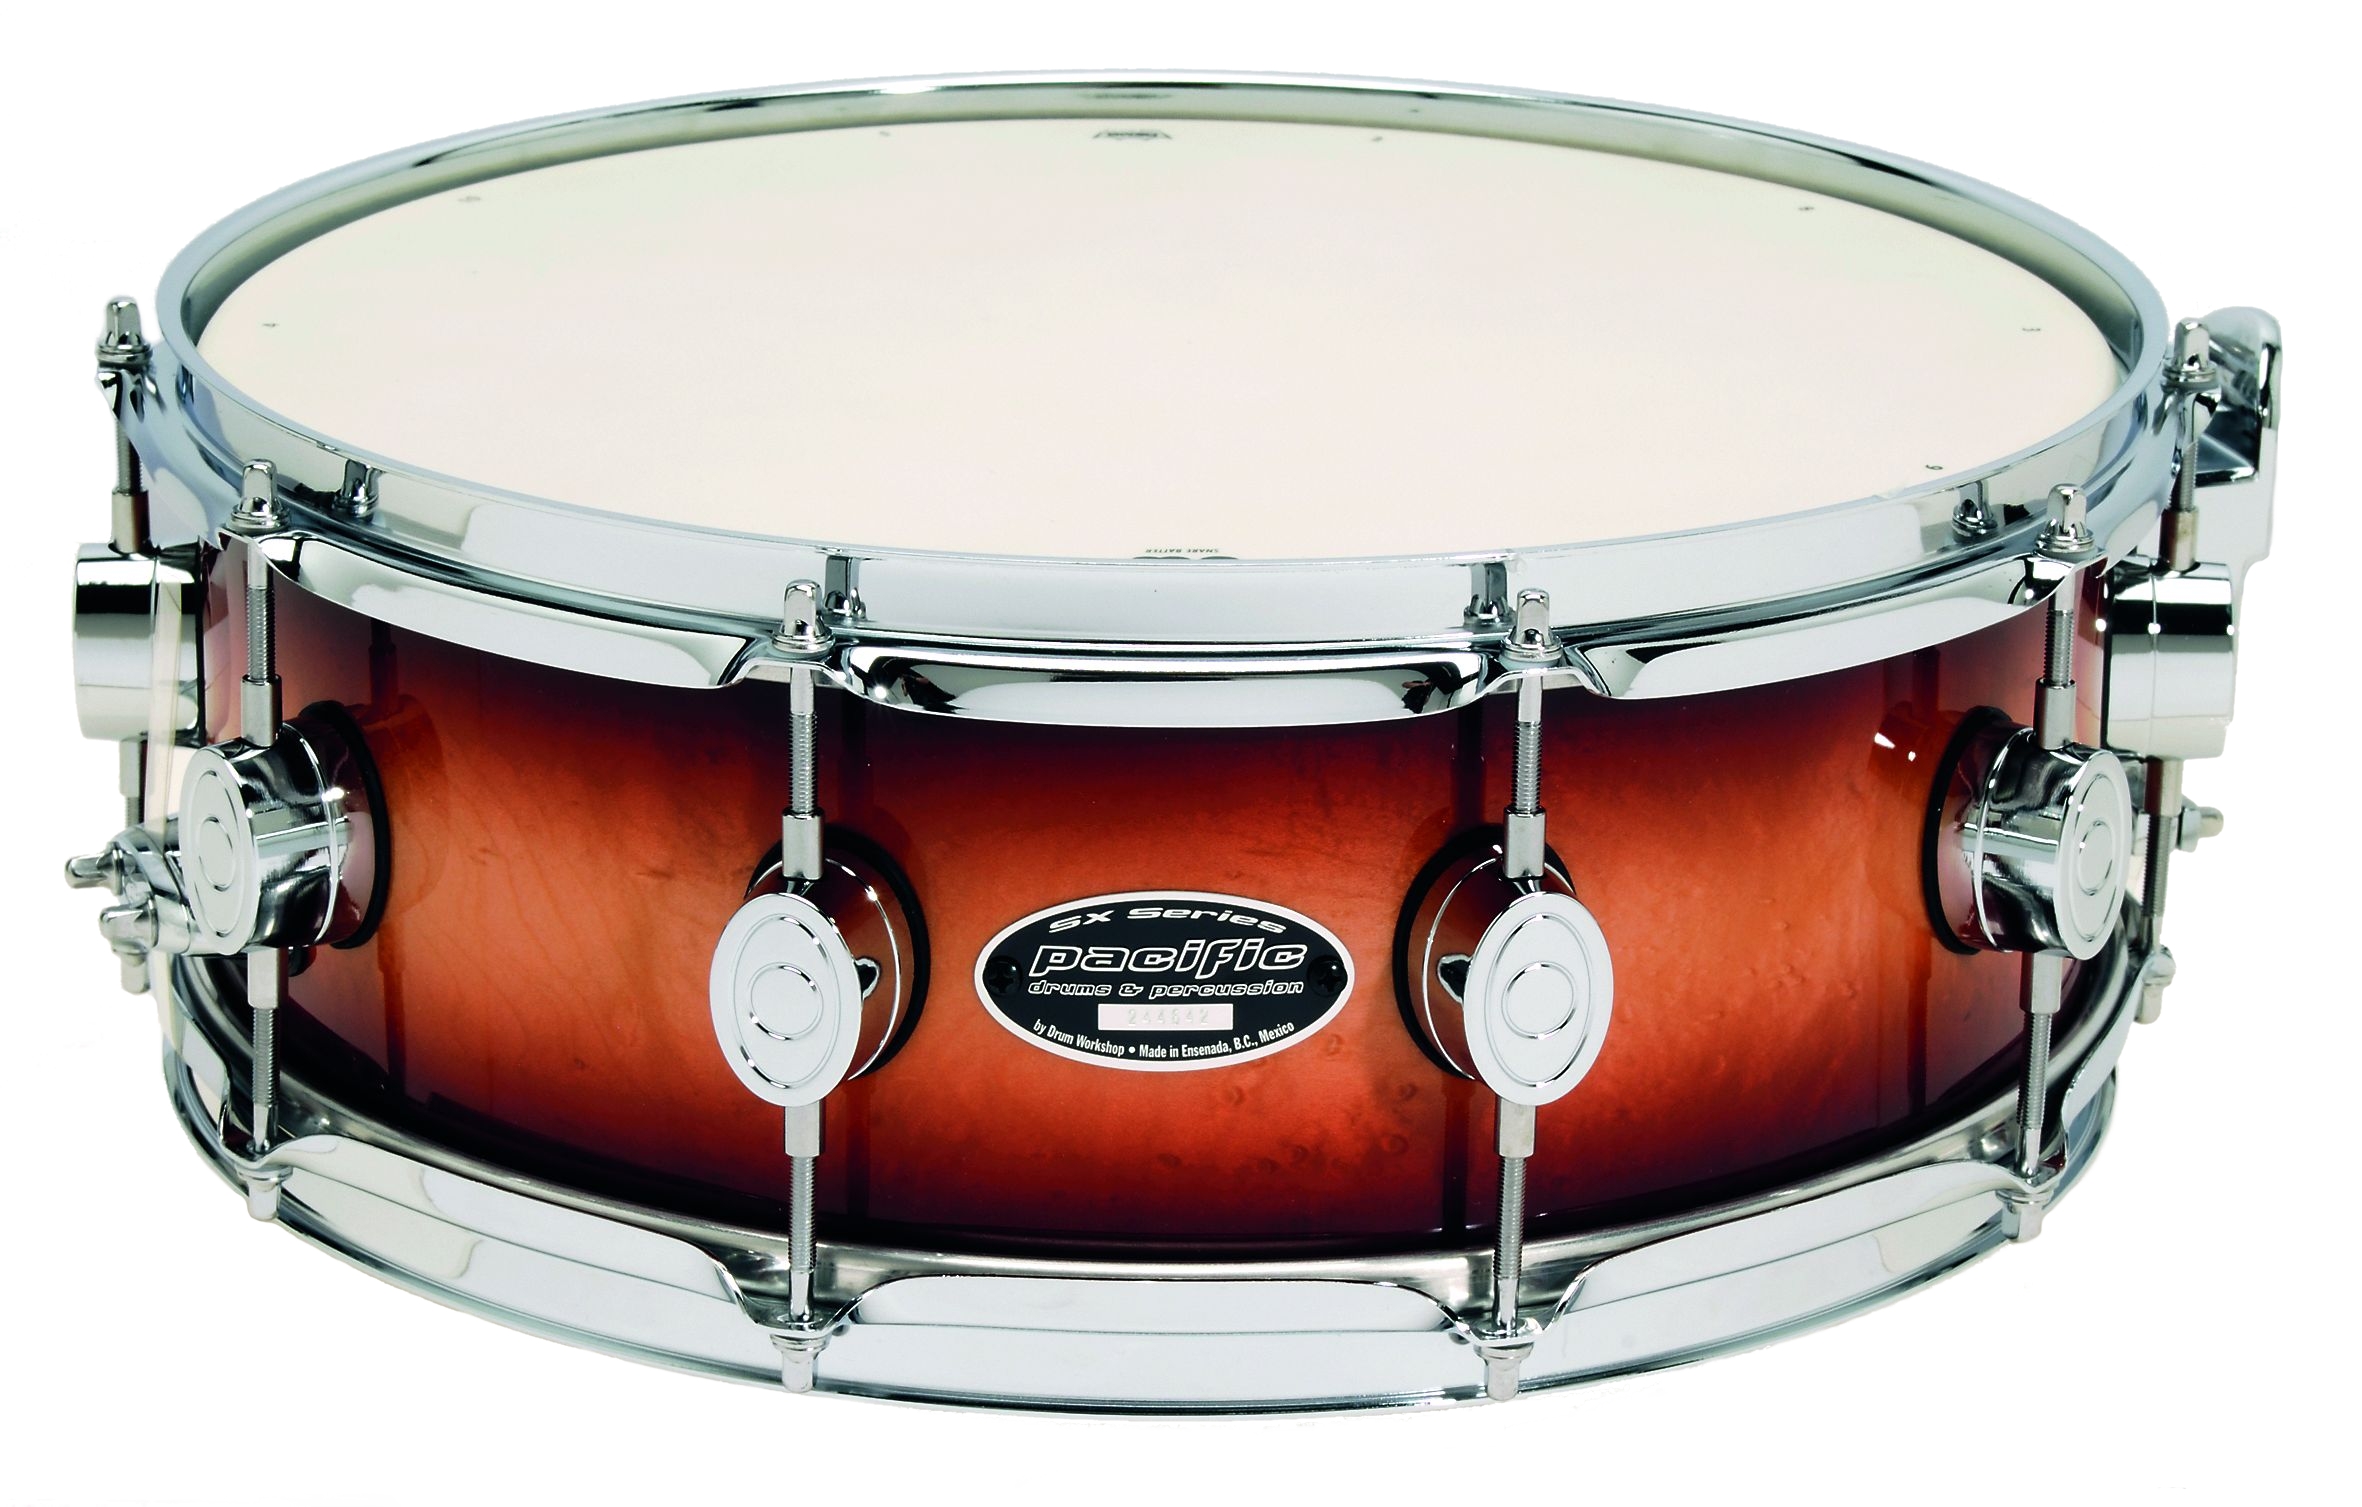 pacific snare drum OFF 72%